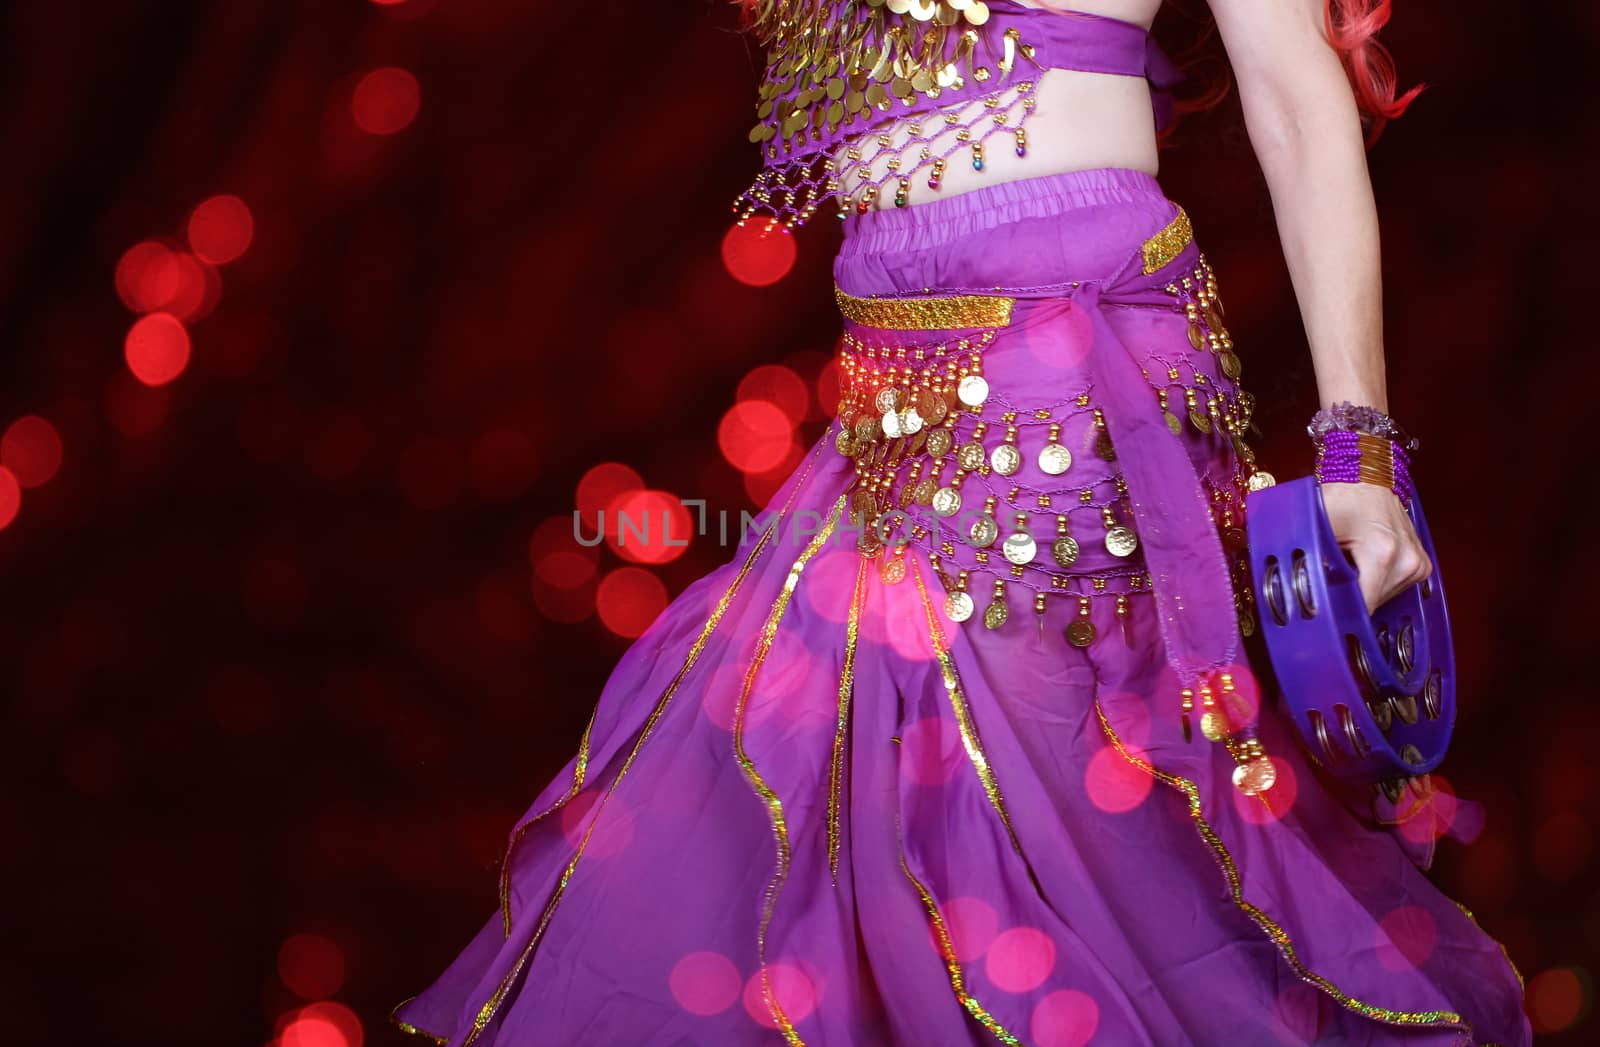 Belly Dancer Wearing Purple Closeup With Tambourine